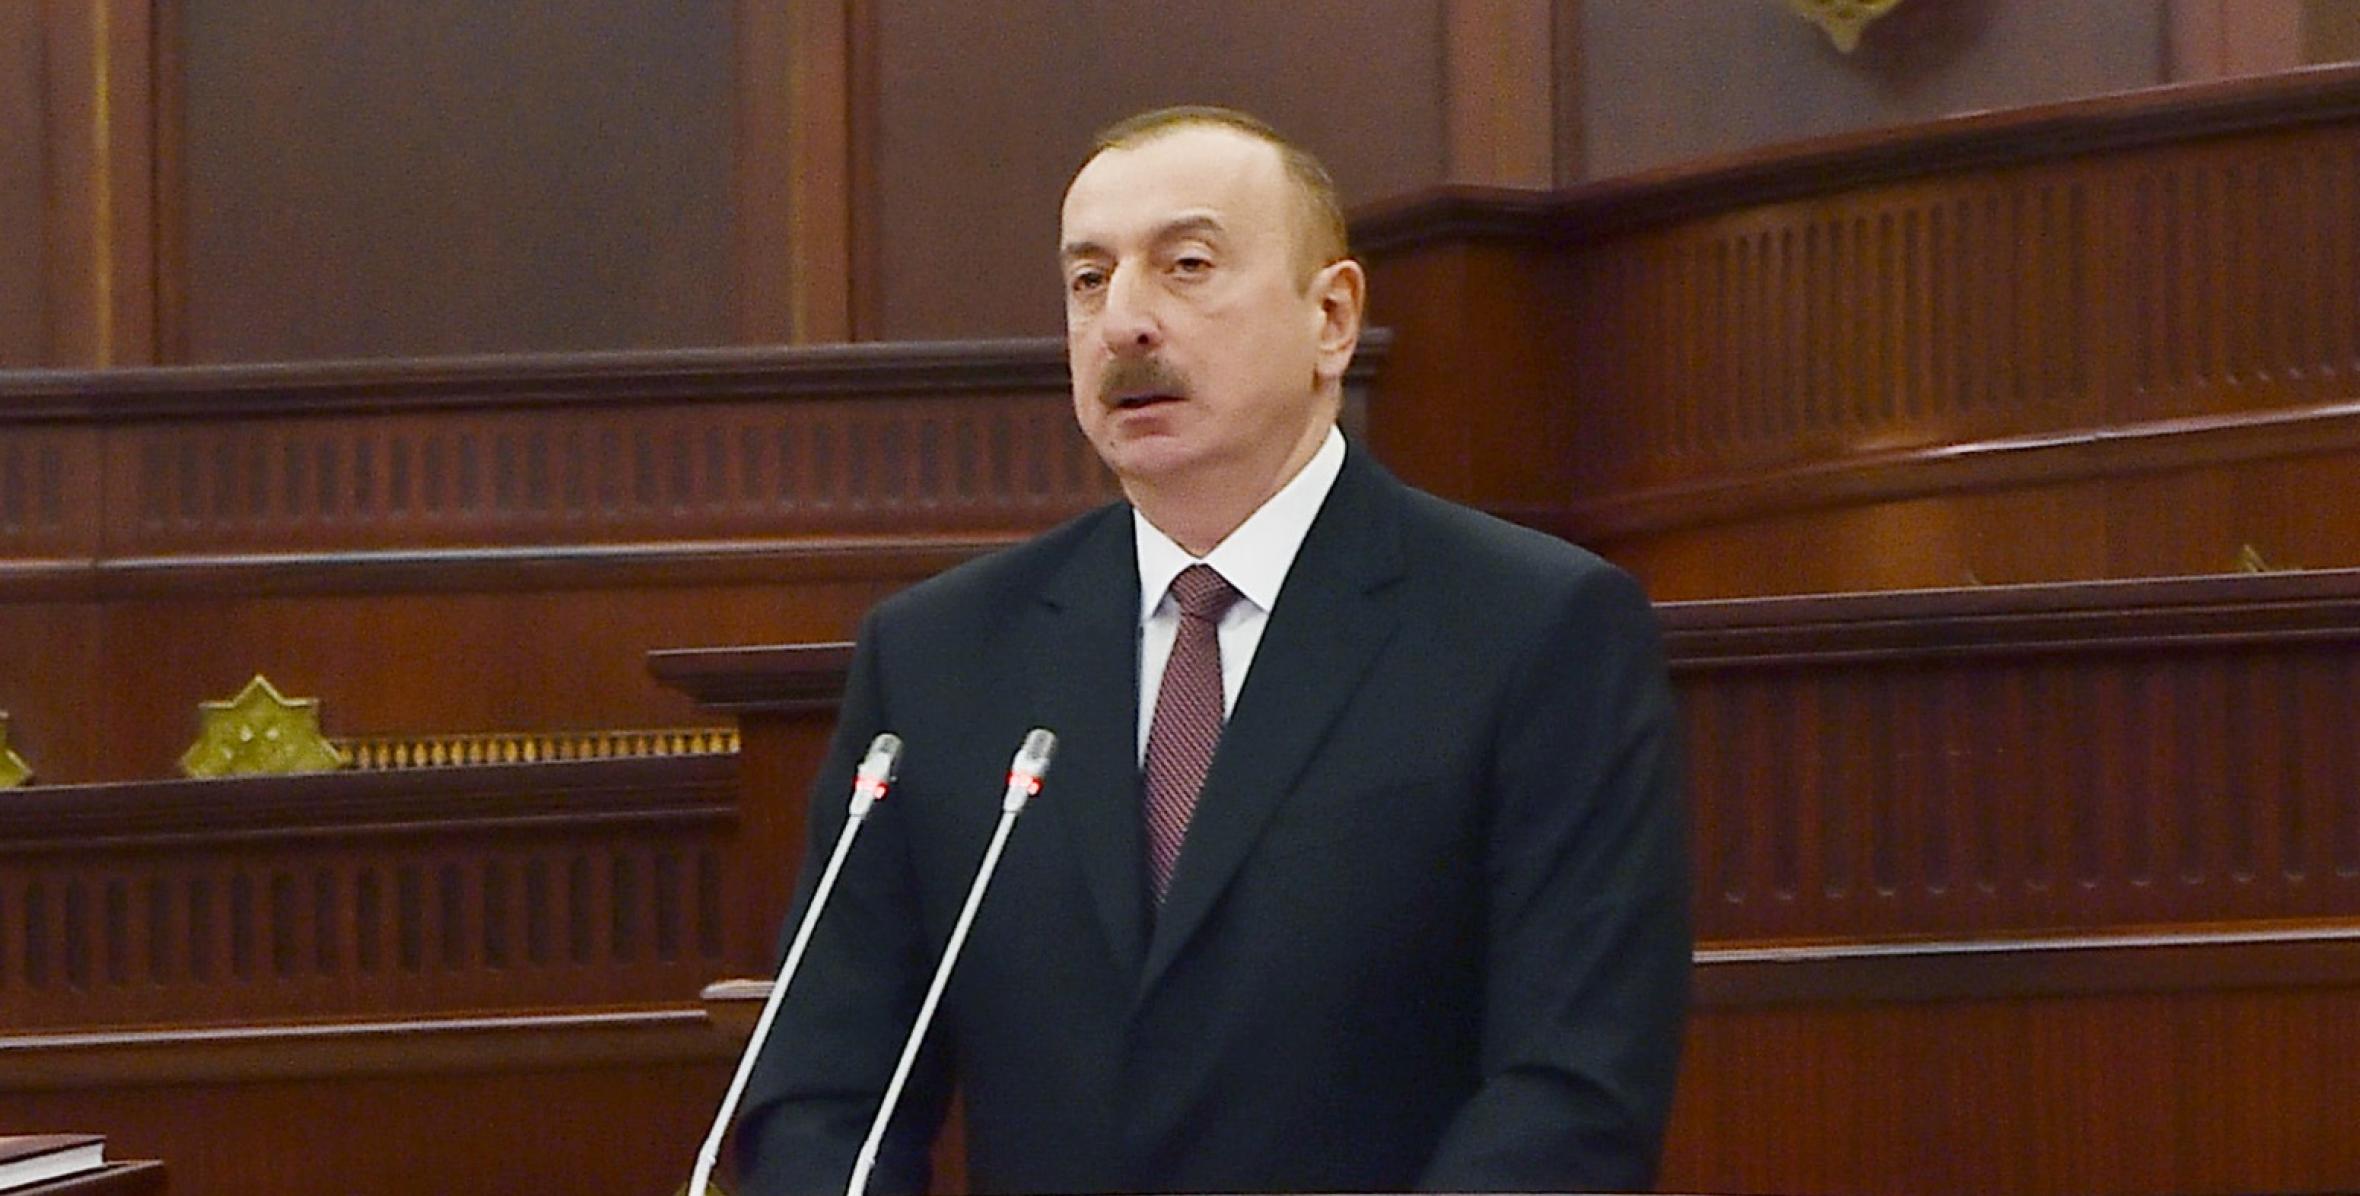 Speech by Ilham Aliyev at the inauguration ceremony